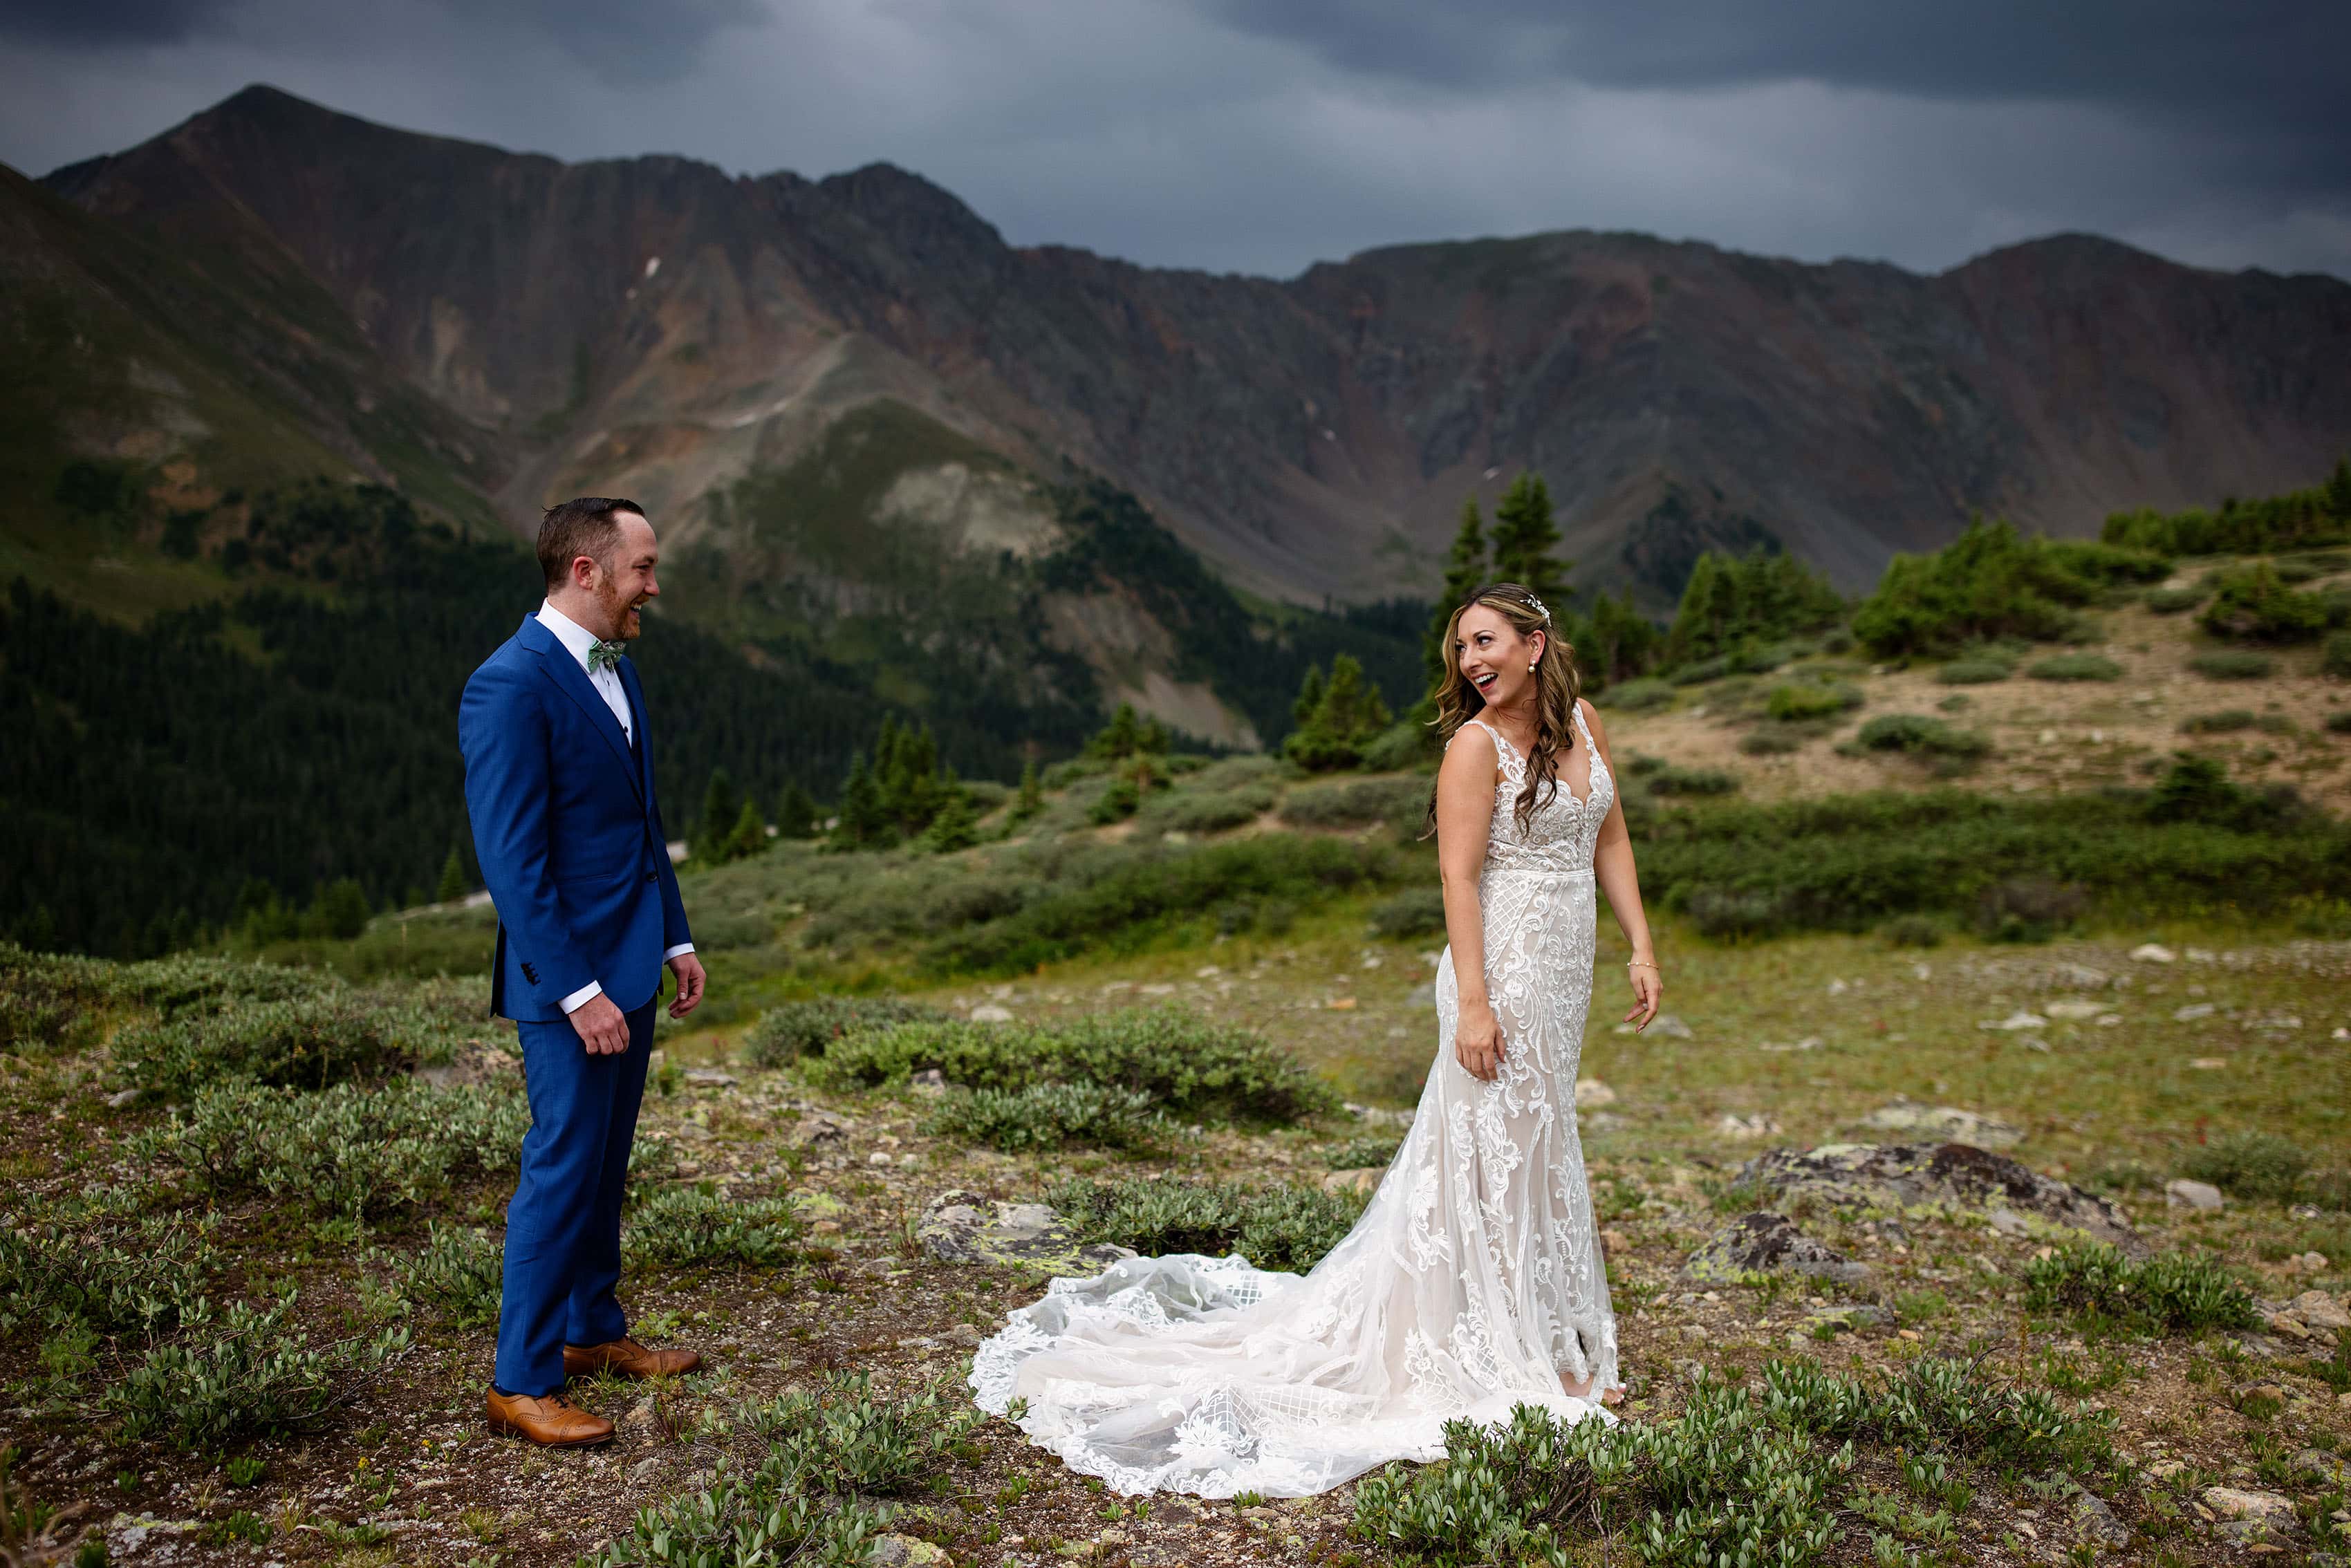 The bride and groom share a moment on Loveland pass